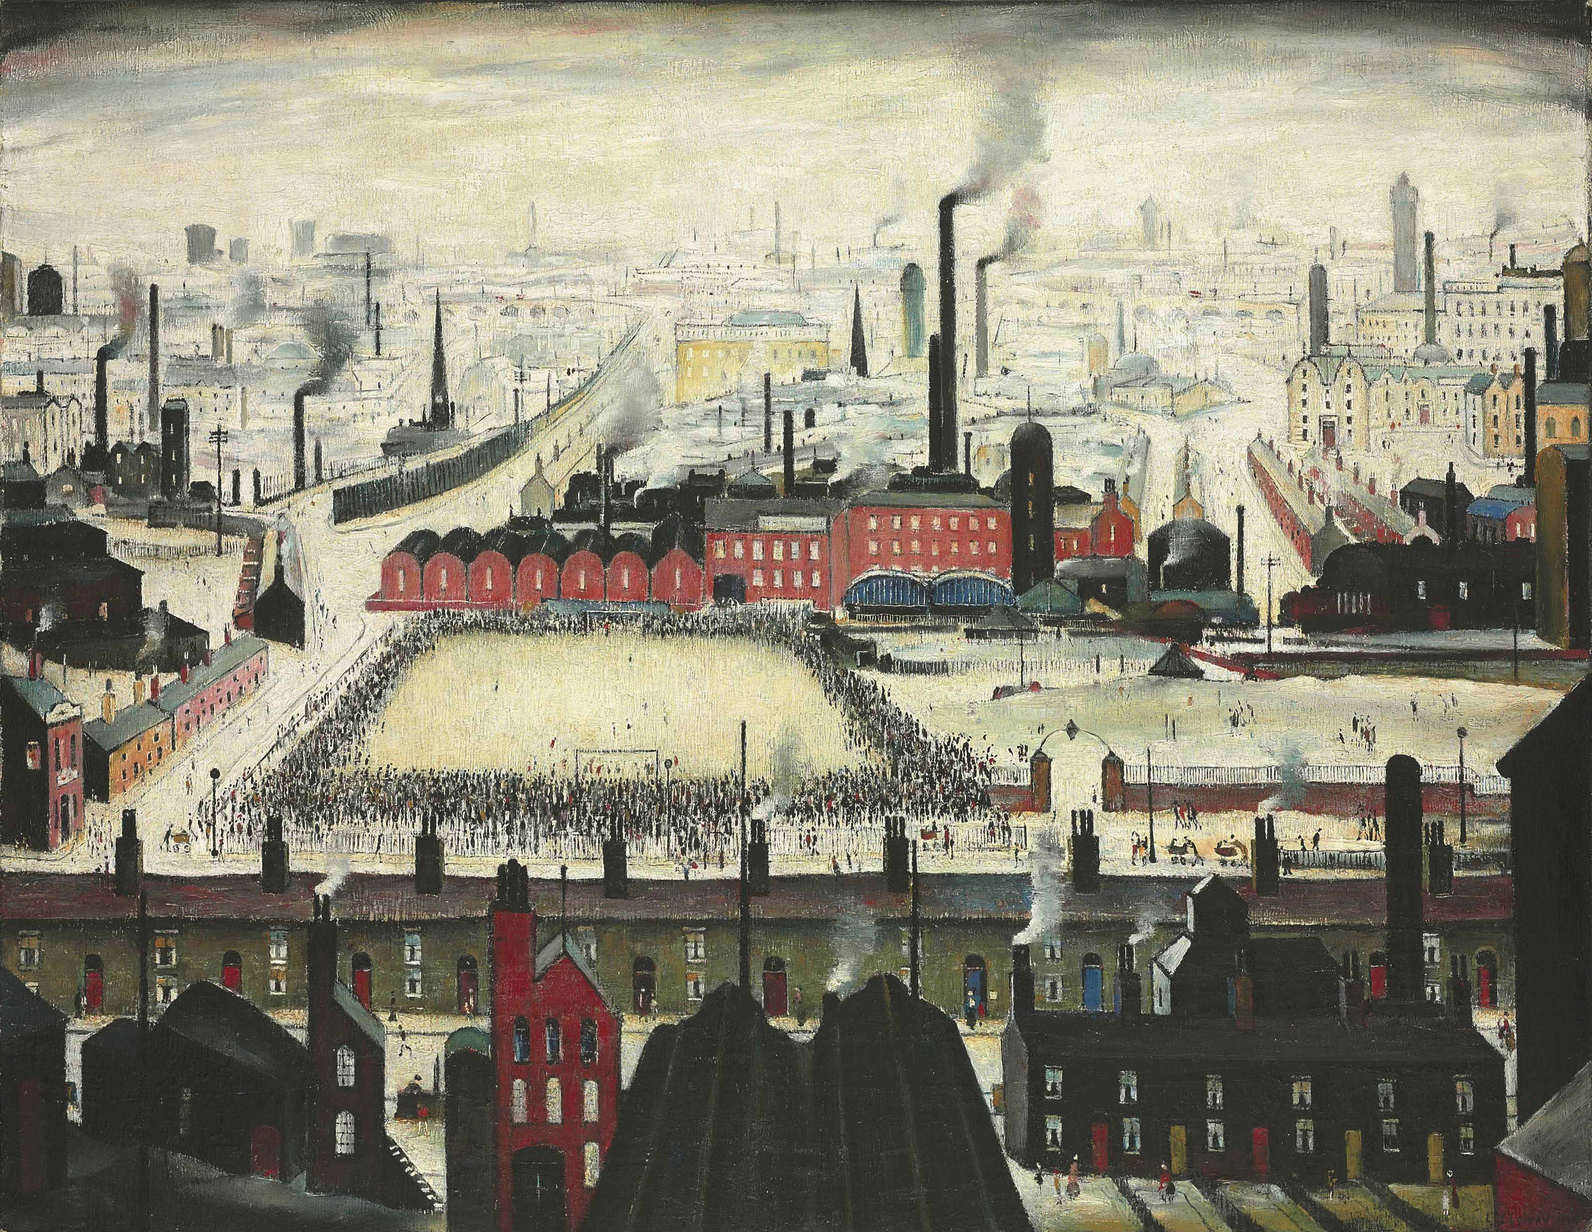 The Football Match (1949) by Laurence Stephen Lowry (1887 - 1976), English artist.